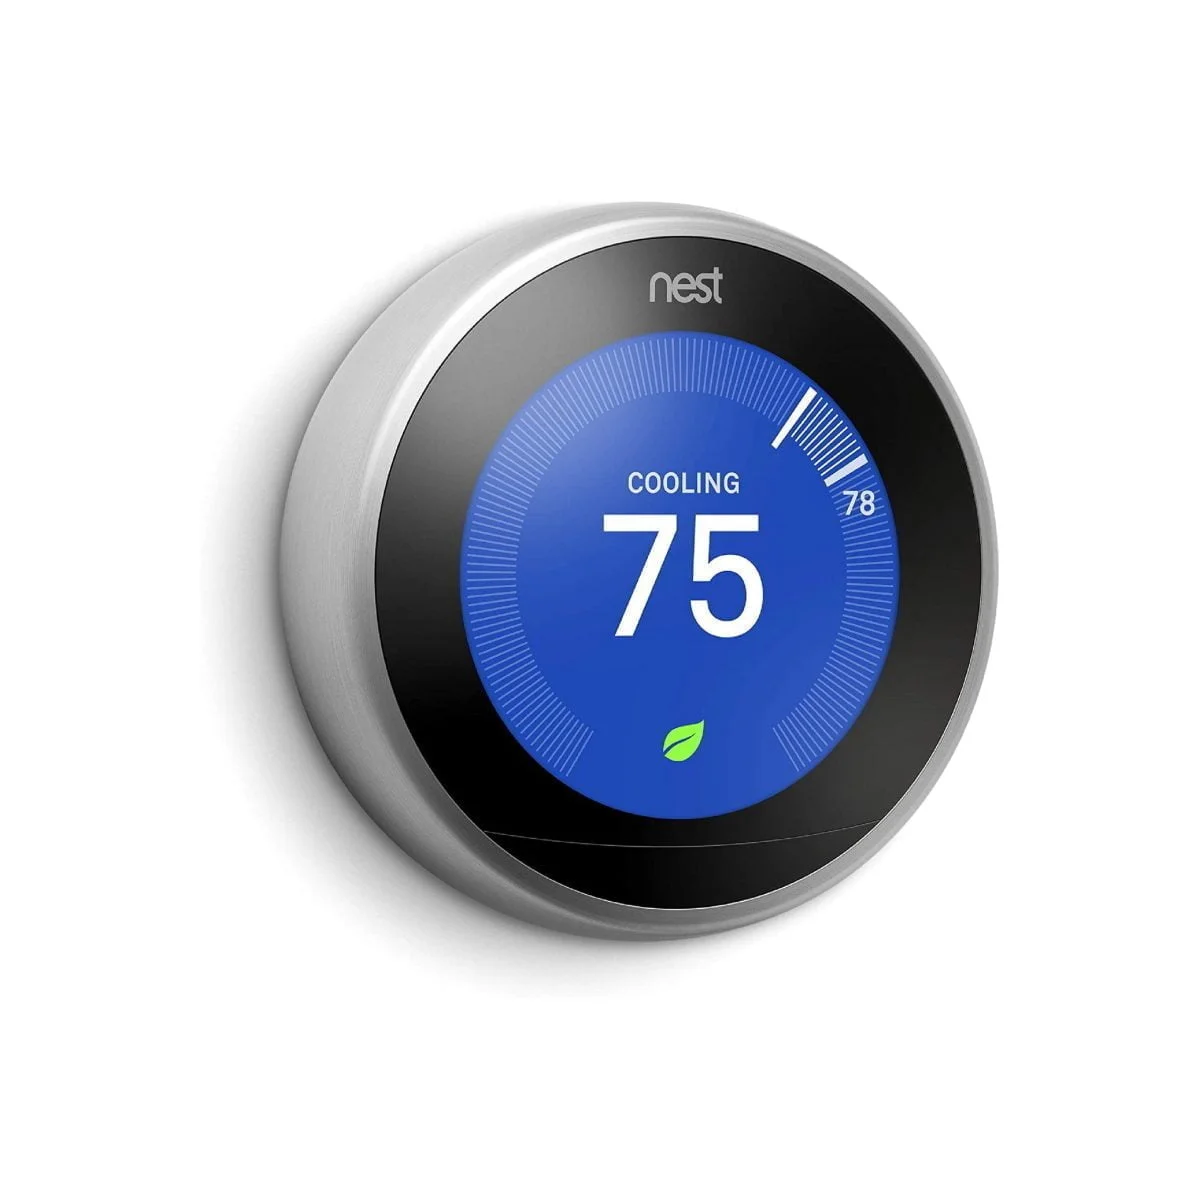 Eqweww 05 Scaled Google &Amp;Lt;H1&Amp;Gt;Google Nest Learning Smart Wifi Thermostat 3Rd Gen - T3007Es Stainless Steel&Amp;Lt;/H1&Amp;Gt; &Amp;Lt;Ul Class=&Amp;Quot;A-Unordered-List A-Vertical A-Spacing-Mini&Amp;Quot;&Amp;Gt; &Amp;Lt;Li&Amp;Gt;&Amp;Lt;Span Class=&Amp;Quot;A-List-Item&Amp;Quot;&Amp;Gt;Auto-Schedule: No More Confusing Programming. It Learns The Temperatures You Like And Programs Itself.&Amp;Lt;/Span&Amp;Gt;&Amp;Lt;/Li&Amp;Gt; &Amp;Lt;Li&Amp;Gt;&Amp;Lt;Span Class=&Amp;Quot;A-List-Item&Amp;Quot;&Amp;Gt;Wi-Fi Thermostat: Connect The Nest Thermostat To Wi-Fi To Change The Temperature From Your Phone, Tablet Or Laptop.&Amp;Lt;/Span&Amp;Gt;&Amp;Lt;/Li&Amp;Gt; &Amp;Lt;Li&Amp;Gt;&Amp;Lt;Span Class=&Amp;Quot;A-List-Item&Amp;Quot;&Amp;Gt;Energy Saving: You’ll See The Nest Leaf When You Choose A Temperature That Saves Energy. It Guides You In The Right Direction.&Amp;Lt;/Span&Amp;Gt;&Amp;Lt;/Li&Amp;Gt; &Amp;Lt;Li&Amp;Gt;&Amp;Lt;Span Class=&Amp;Quot;A-List-Item&Amp;Quot;&Amp;Gt;Smart Thermostat: Early-On Nest Learns How Your Home Warms Up And Keeps An Eye On The Weather To Get You The Temperature You Want When You Want It.&Amp;Lt;/Span&Amp;Gt;&Amp;Lt;/Li&Amp;Gt; &Amp;Lt;Li&Amp;Gt;&Amp;Lt;Span Class=&Amp;Quot;A-List-Item&Amp;Quot;&Amp;Gt;Home/Away Assist: The Nest Thermostat Automatically Turns Itself Down When You’re Away To Avoid Heating Or Cooling An Empty Home.&Amp;Lt;/Span&Amp;Gt;&Amp;Lt;/Li&Amp;Gt; &Amp;Lt;Li&Amp;Gt;&Amp;Lt;Span Class=&Amp;Quot;A-List-Item&Amp;Quot;&Amp;Gt;Works With Amazon Alexa For Voice Control (Alexa Device Sold Separately)&Amp;Lt;/Span&Amp;Gt;&Amp;Lt;/Li&Amp;Gt; &Amp;Lt;Li&Amp;Gt;&Amp;Lt;Span Class=&Amp;Quot;A-List-Item&Amp;Quot;&Amp;Gt;Auto-Schedule: Nest Learns The Temperatures You Like And Programs Itself In About A Week.&Amp;Lt;/Span&Amp;Gt; &Amp;Lt;H5&Amp;Gt;Note : Direct Replacement Warranty One Year&Amp;Lt;/H5&Amp;Gt; &Amp;Lt;Div Class=&Amp;Quot;Html-Fragment&Amp;Quot;&Amp;Gt; &Amp;Lt;Div&Amp;Gt; &Amp;Lt;B&Amp;Gt;We Also Provide International Wholesale And Retail Shipping To All Gcc Countries: Saudi Arabia, Qatar, Oman, Kuwait, Bahrain.&Amp;Lt;/B&Amp;Gt; &Amp;Lt;/Div&Amp;Gt; &Amp;Lt;/Div&Amp;Gt;&Amp;Lt;/Li&Amp;Gt; &Amp;Lt;/Ul&Amp;Gt; &Amp;Lt;Div Class=&Amp;Quot;A-Row A-Expander-Container A-Expander-Inline-Container&Amp;Quot; Aria-Live=&Amp;Quot;Polite&Amp;Quot;&Amp;Gt; &Amp;Lt;Div Class=&Amp;Quot;A-Expander-Content A-Expander-Extend-Content A-Expander-Content-Expanded&Amp;Quot; Aria-Expanded=&Amp;Quot;True&Amp;Quot;&Amp;Gt;&Amp;Lt;/Div&Amp;Gt; &Amp;Nbsp; &Amp;Lt;/Div&Amp;Gt; Thermostat Google Nest Learning Smart Wifi Thermostat 3Rd Gen - T3007Es Stainless Steel